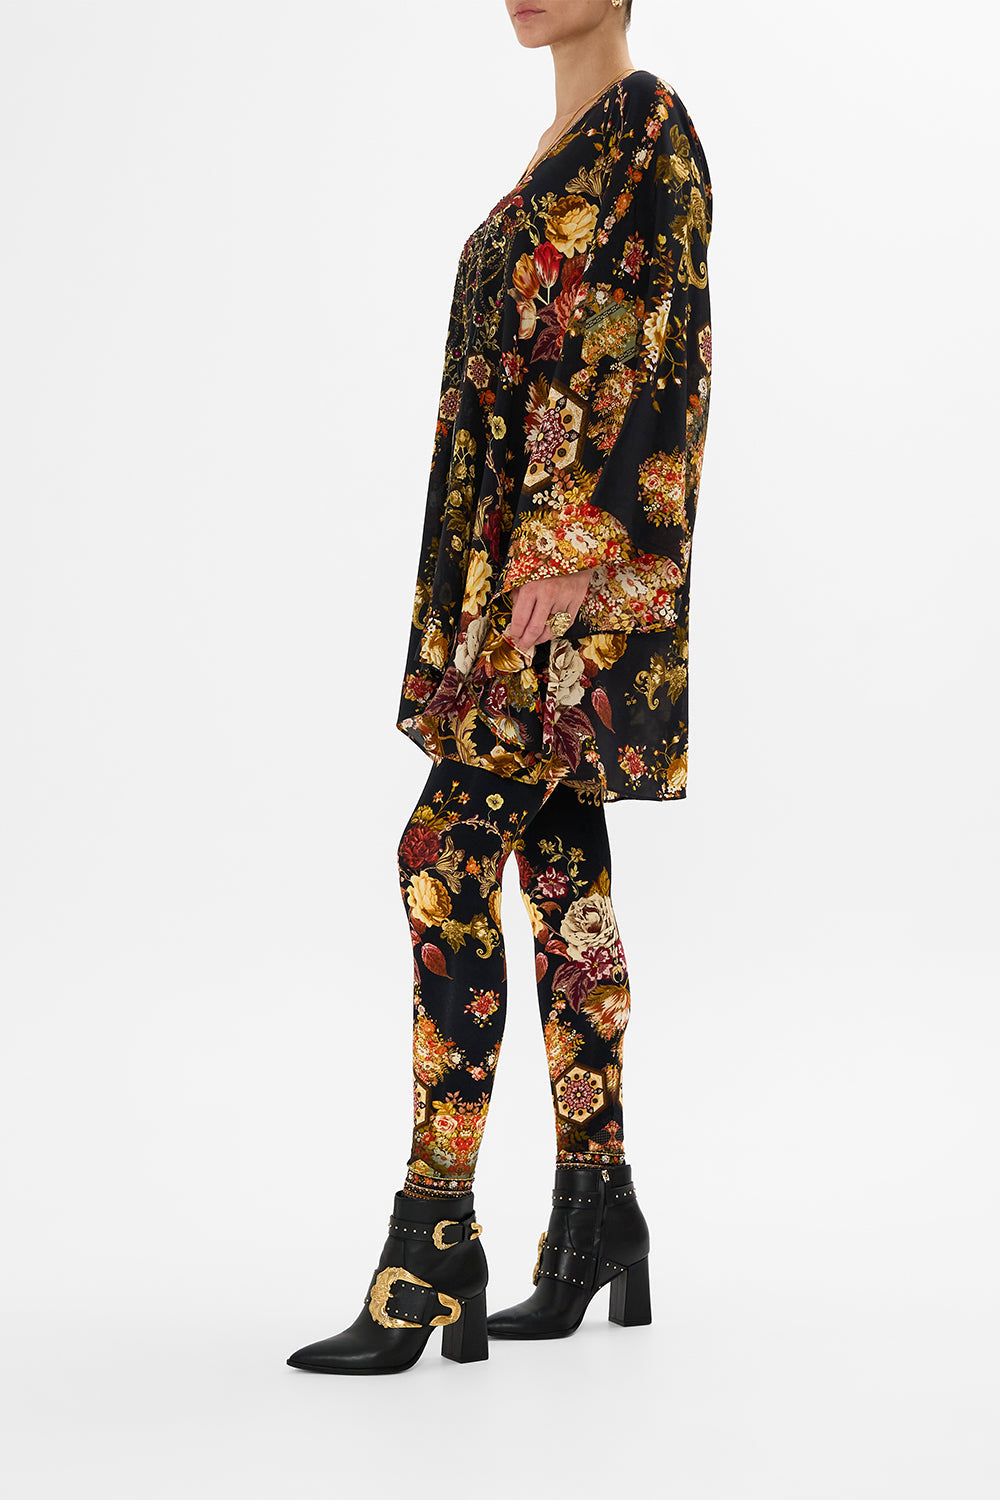 CAMILLA floral leggings in Stitched In Time print.